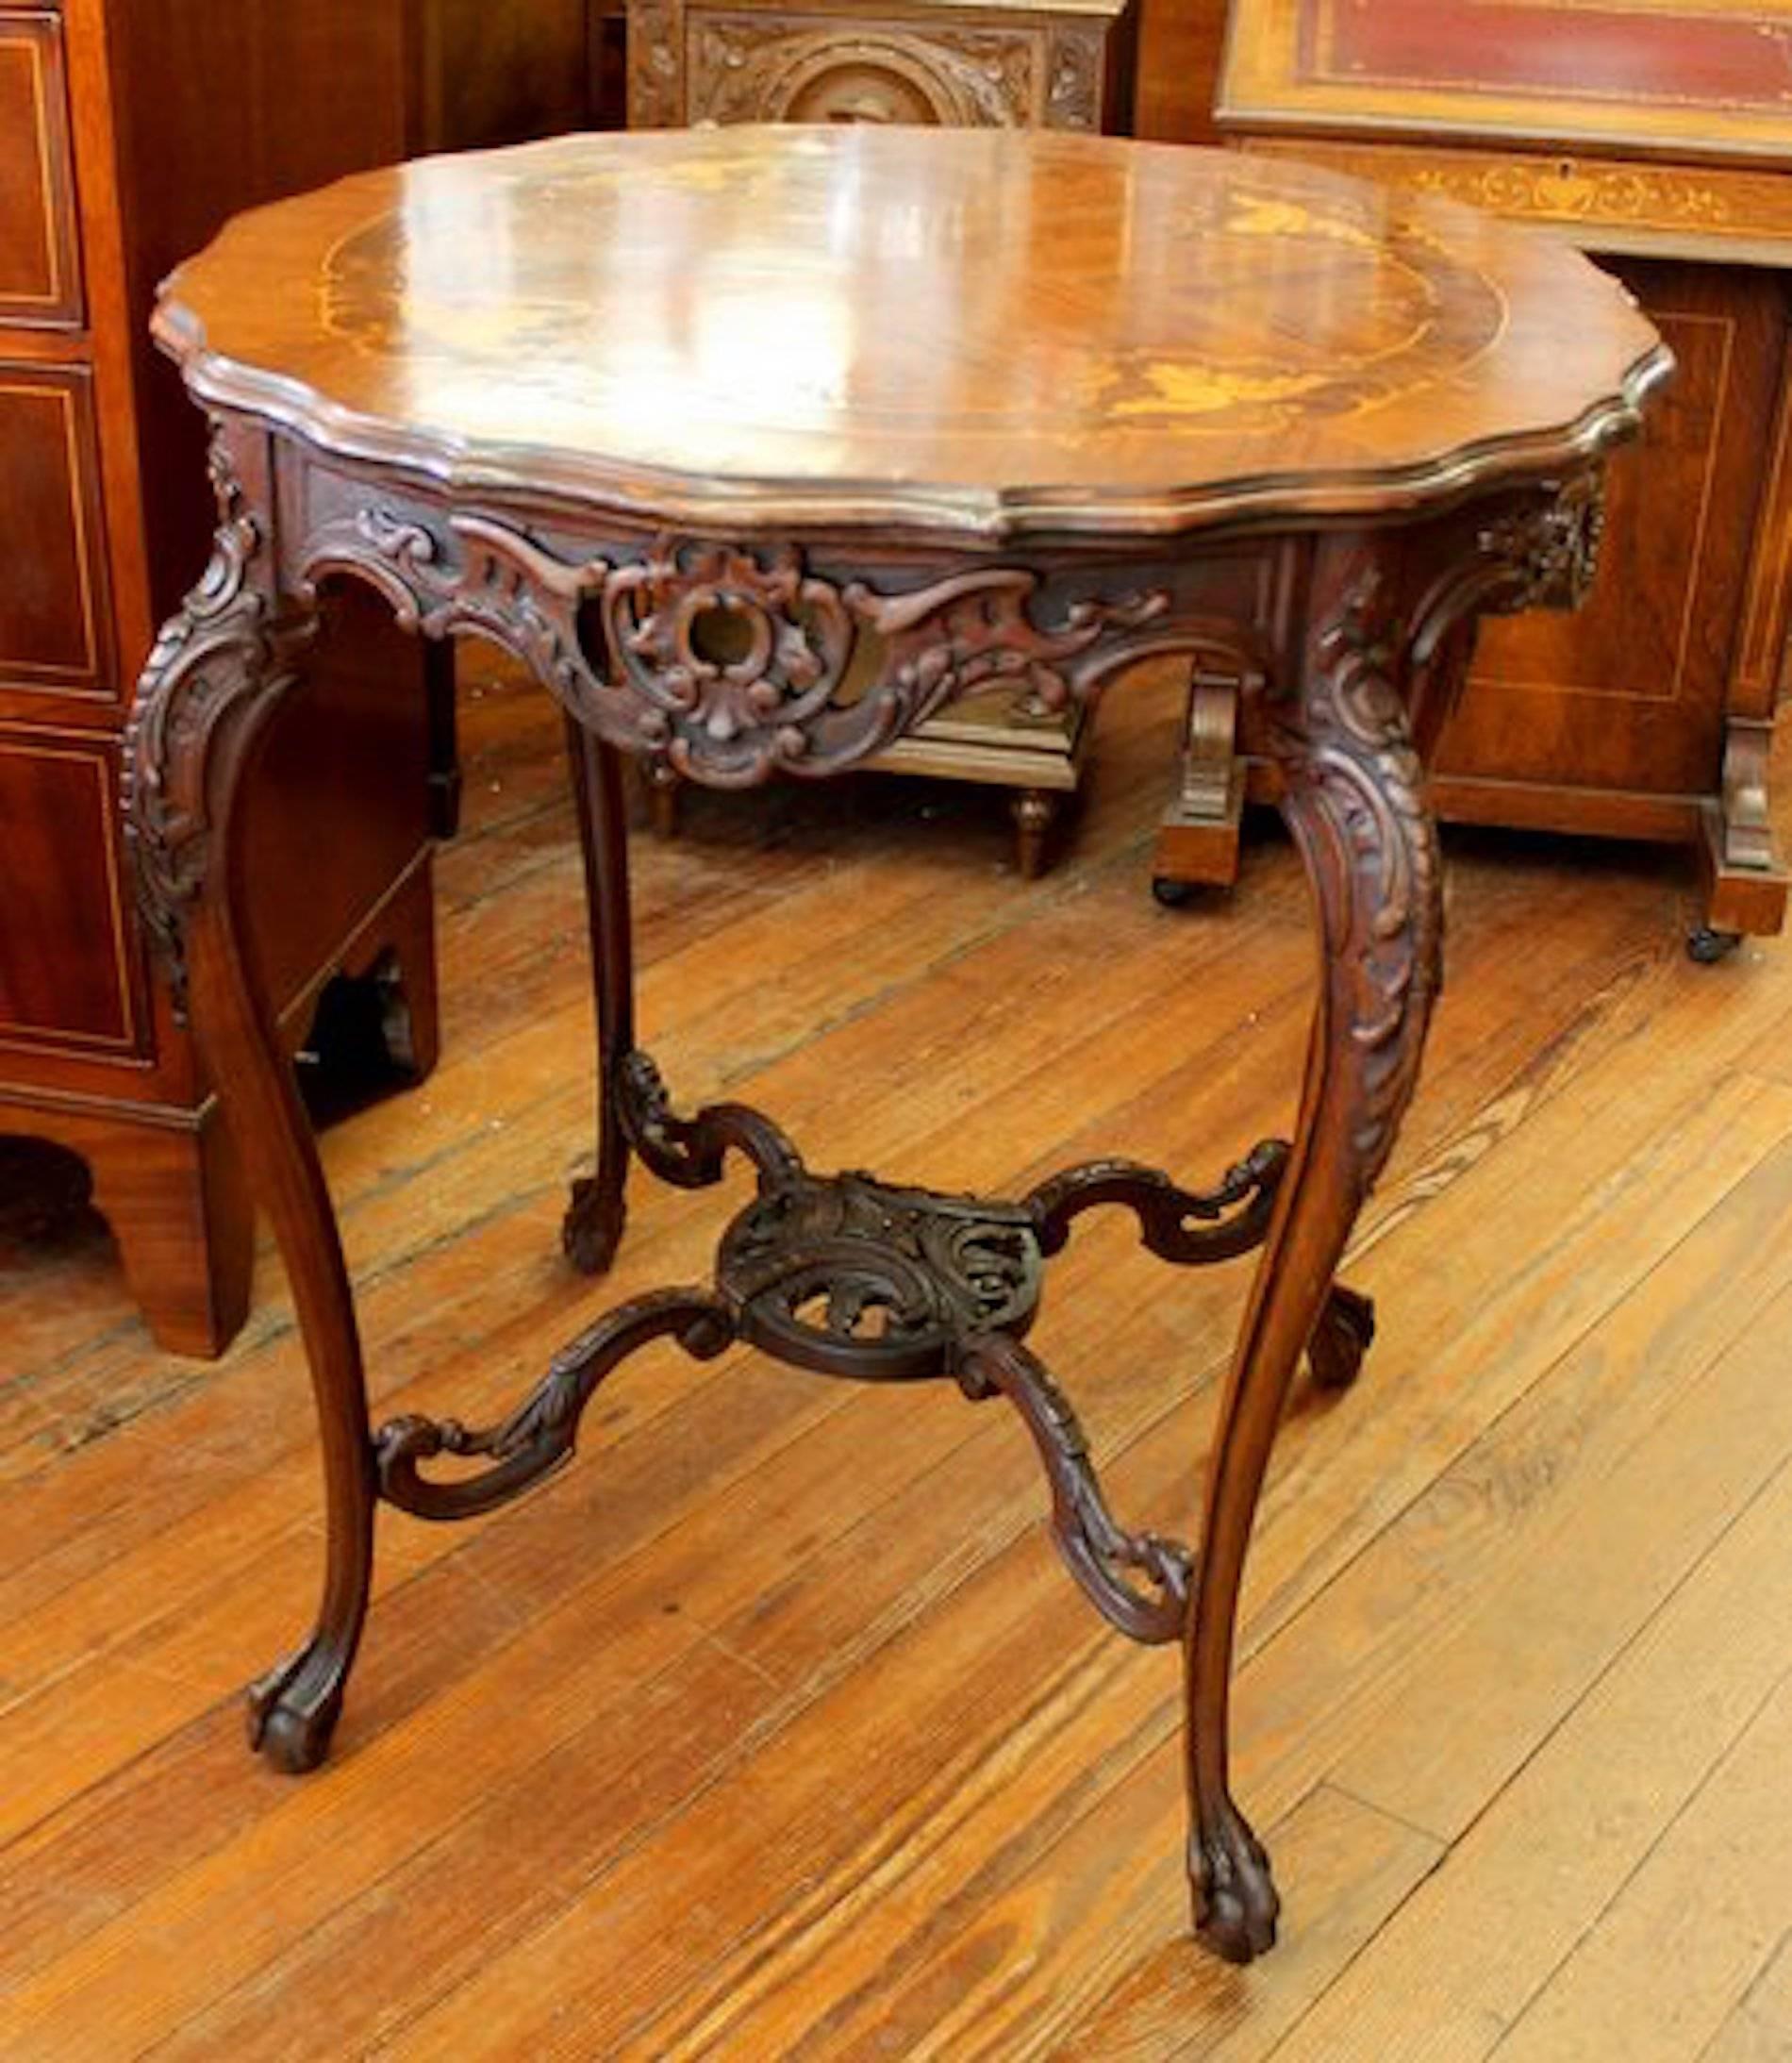 Fabulous quality antique English hand-carved mahogany and exquisite marquetry inlaid 